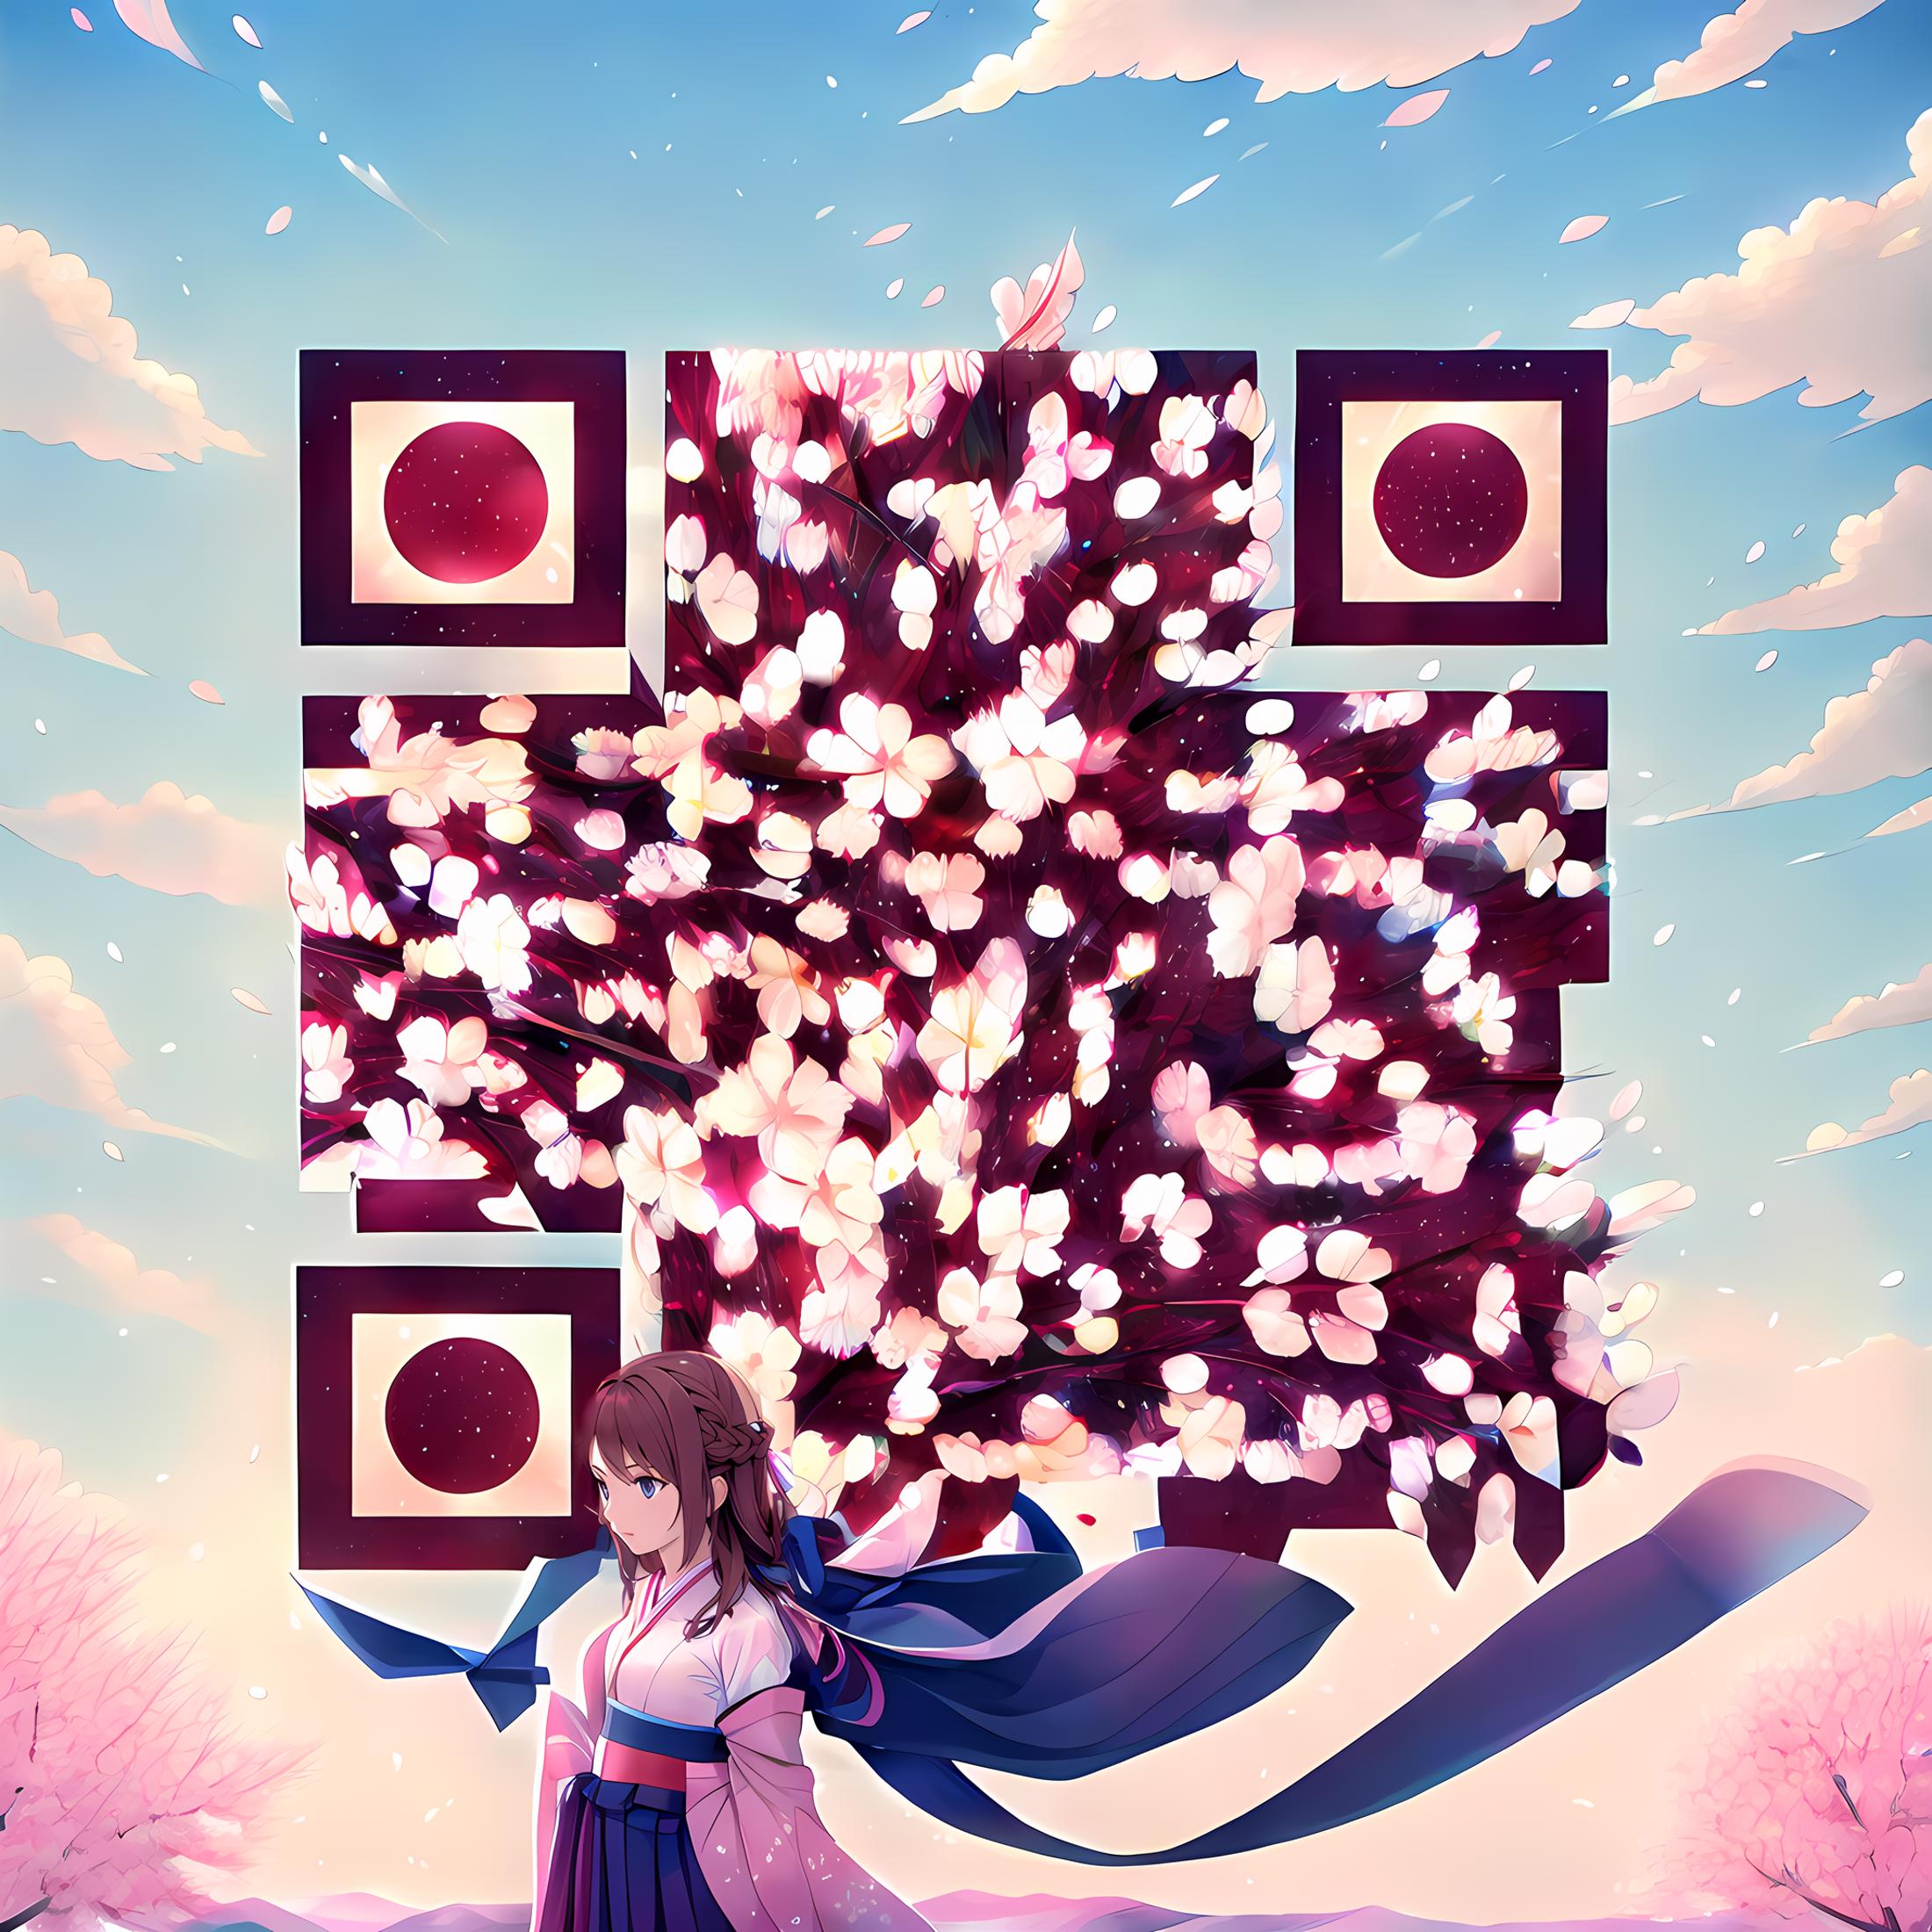 QR Code Monster image by Machi